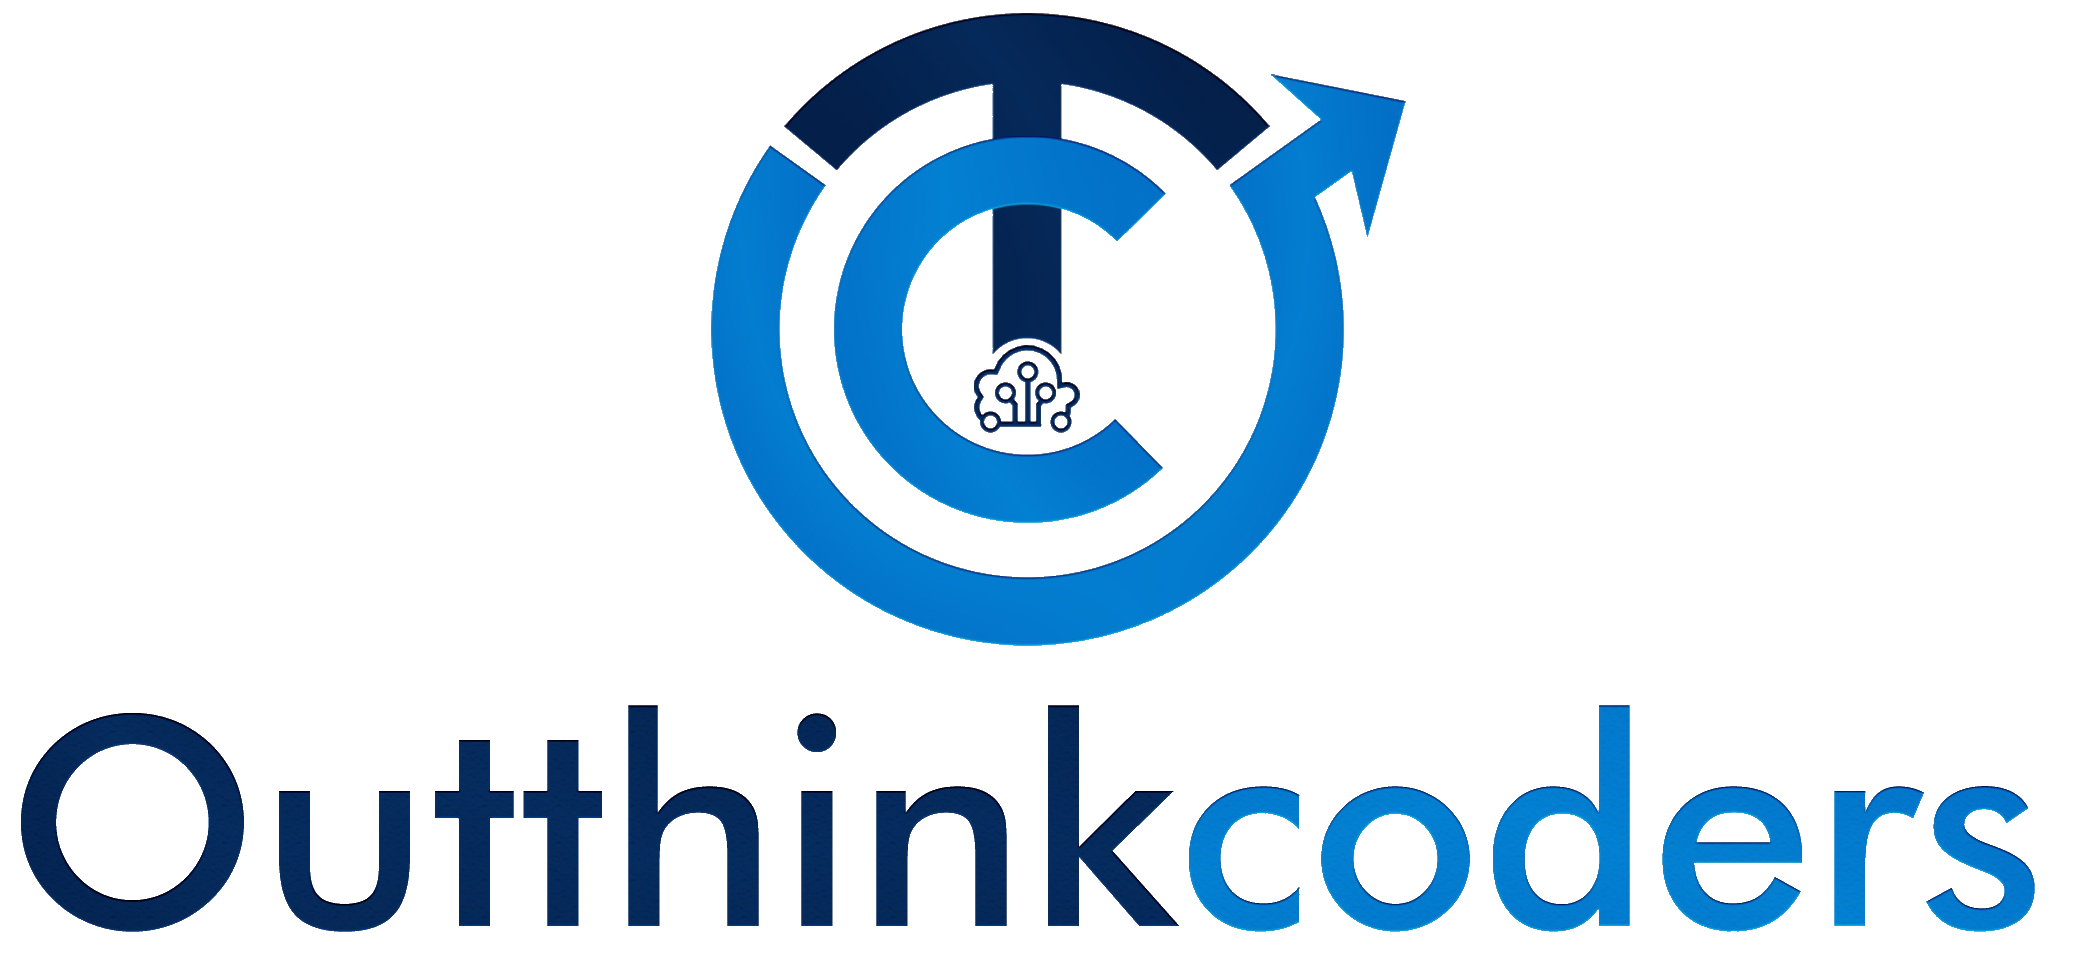 Outthinkcoders